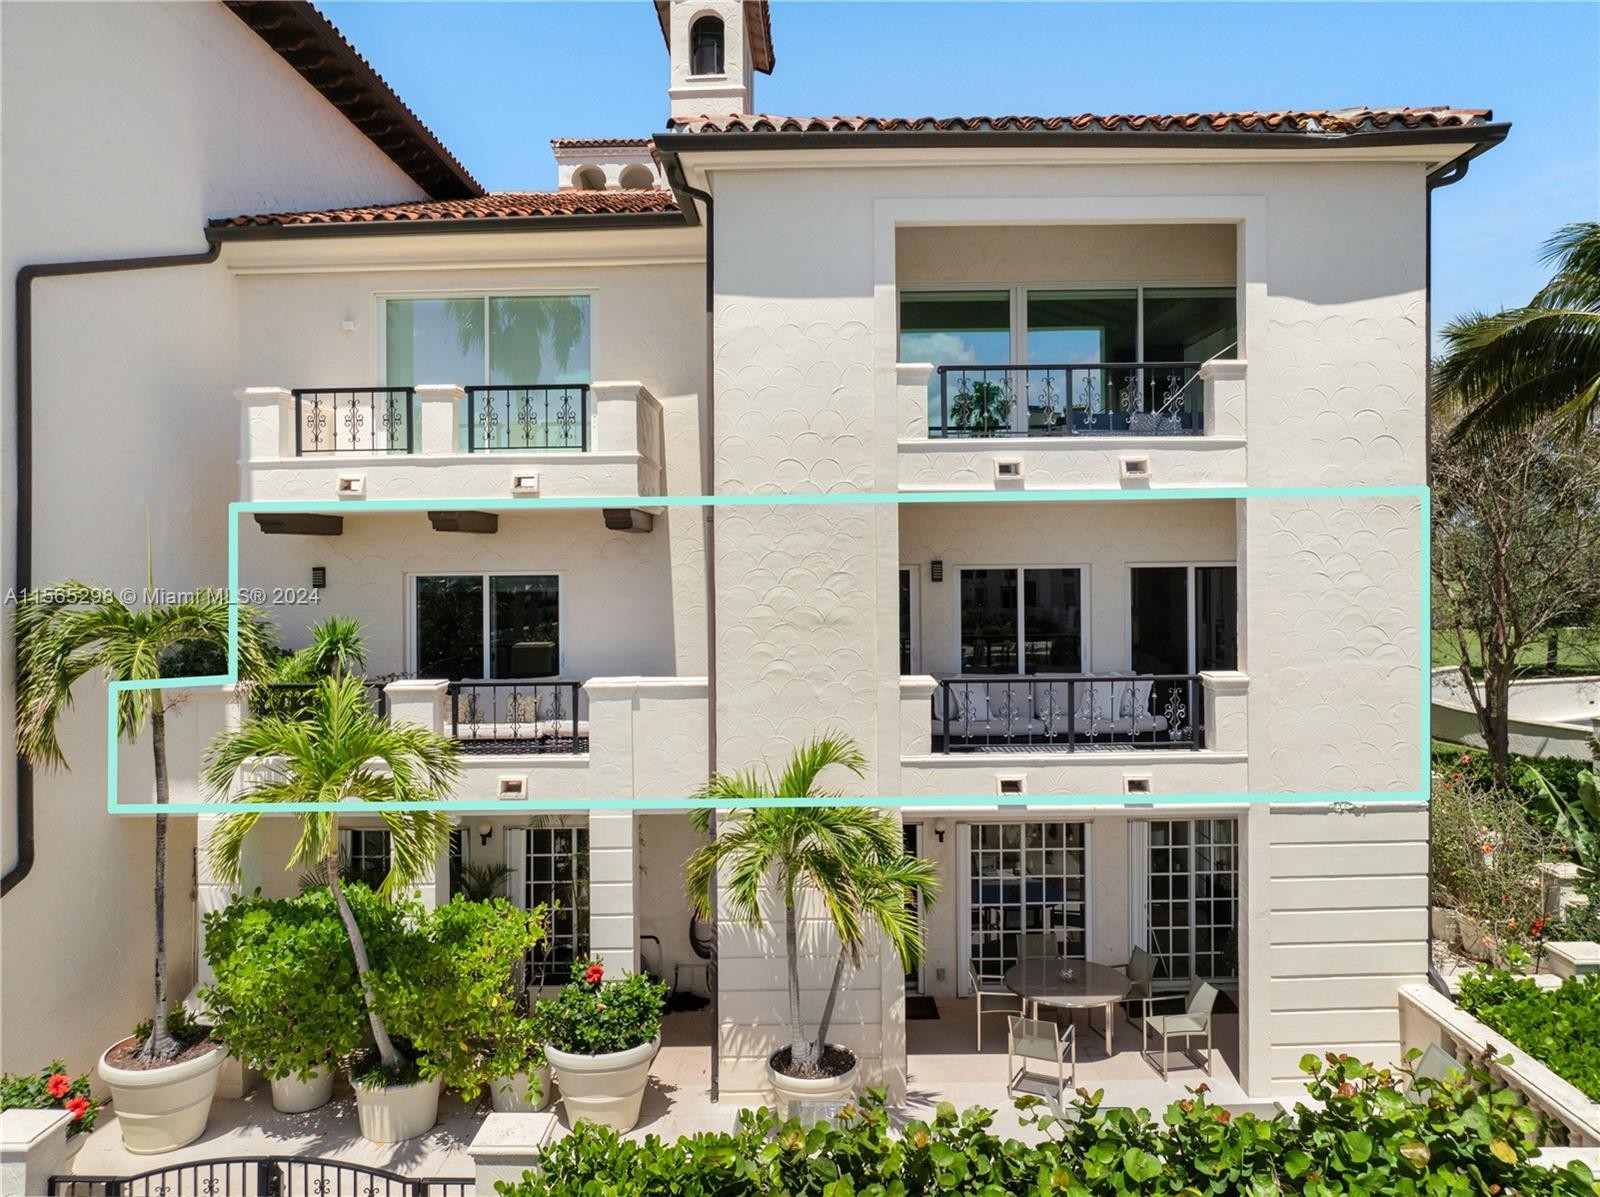 27. 2221 Fisher Island Dr